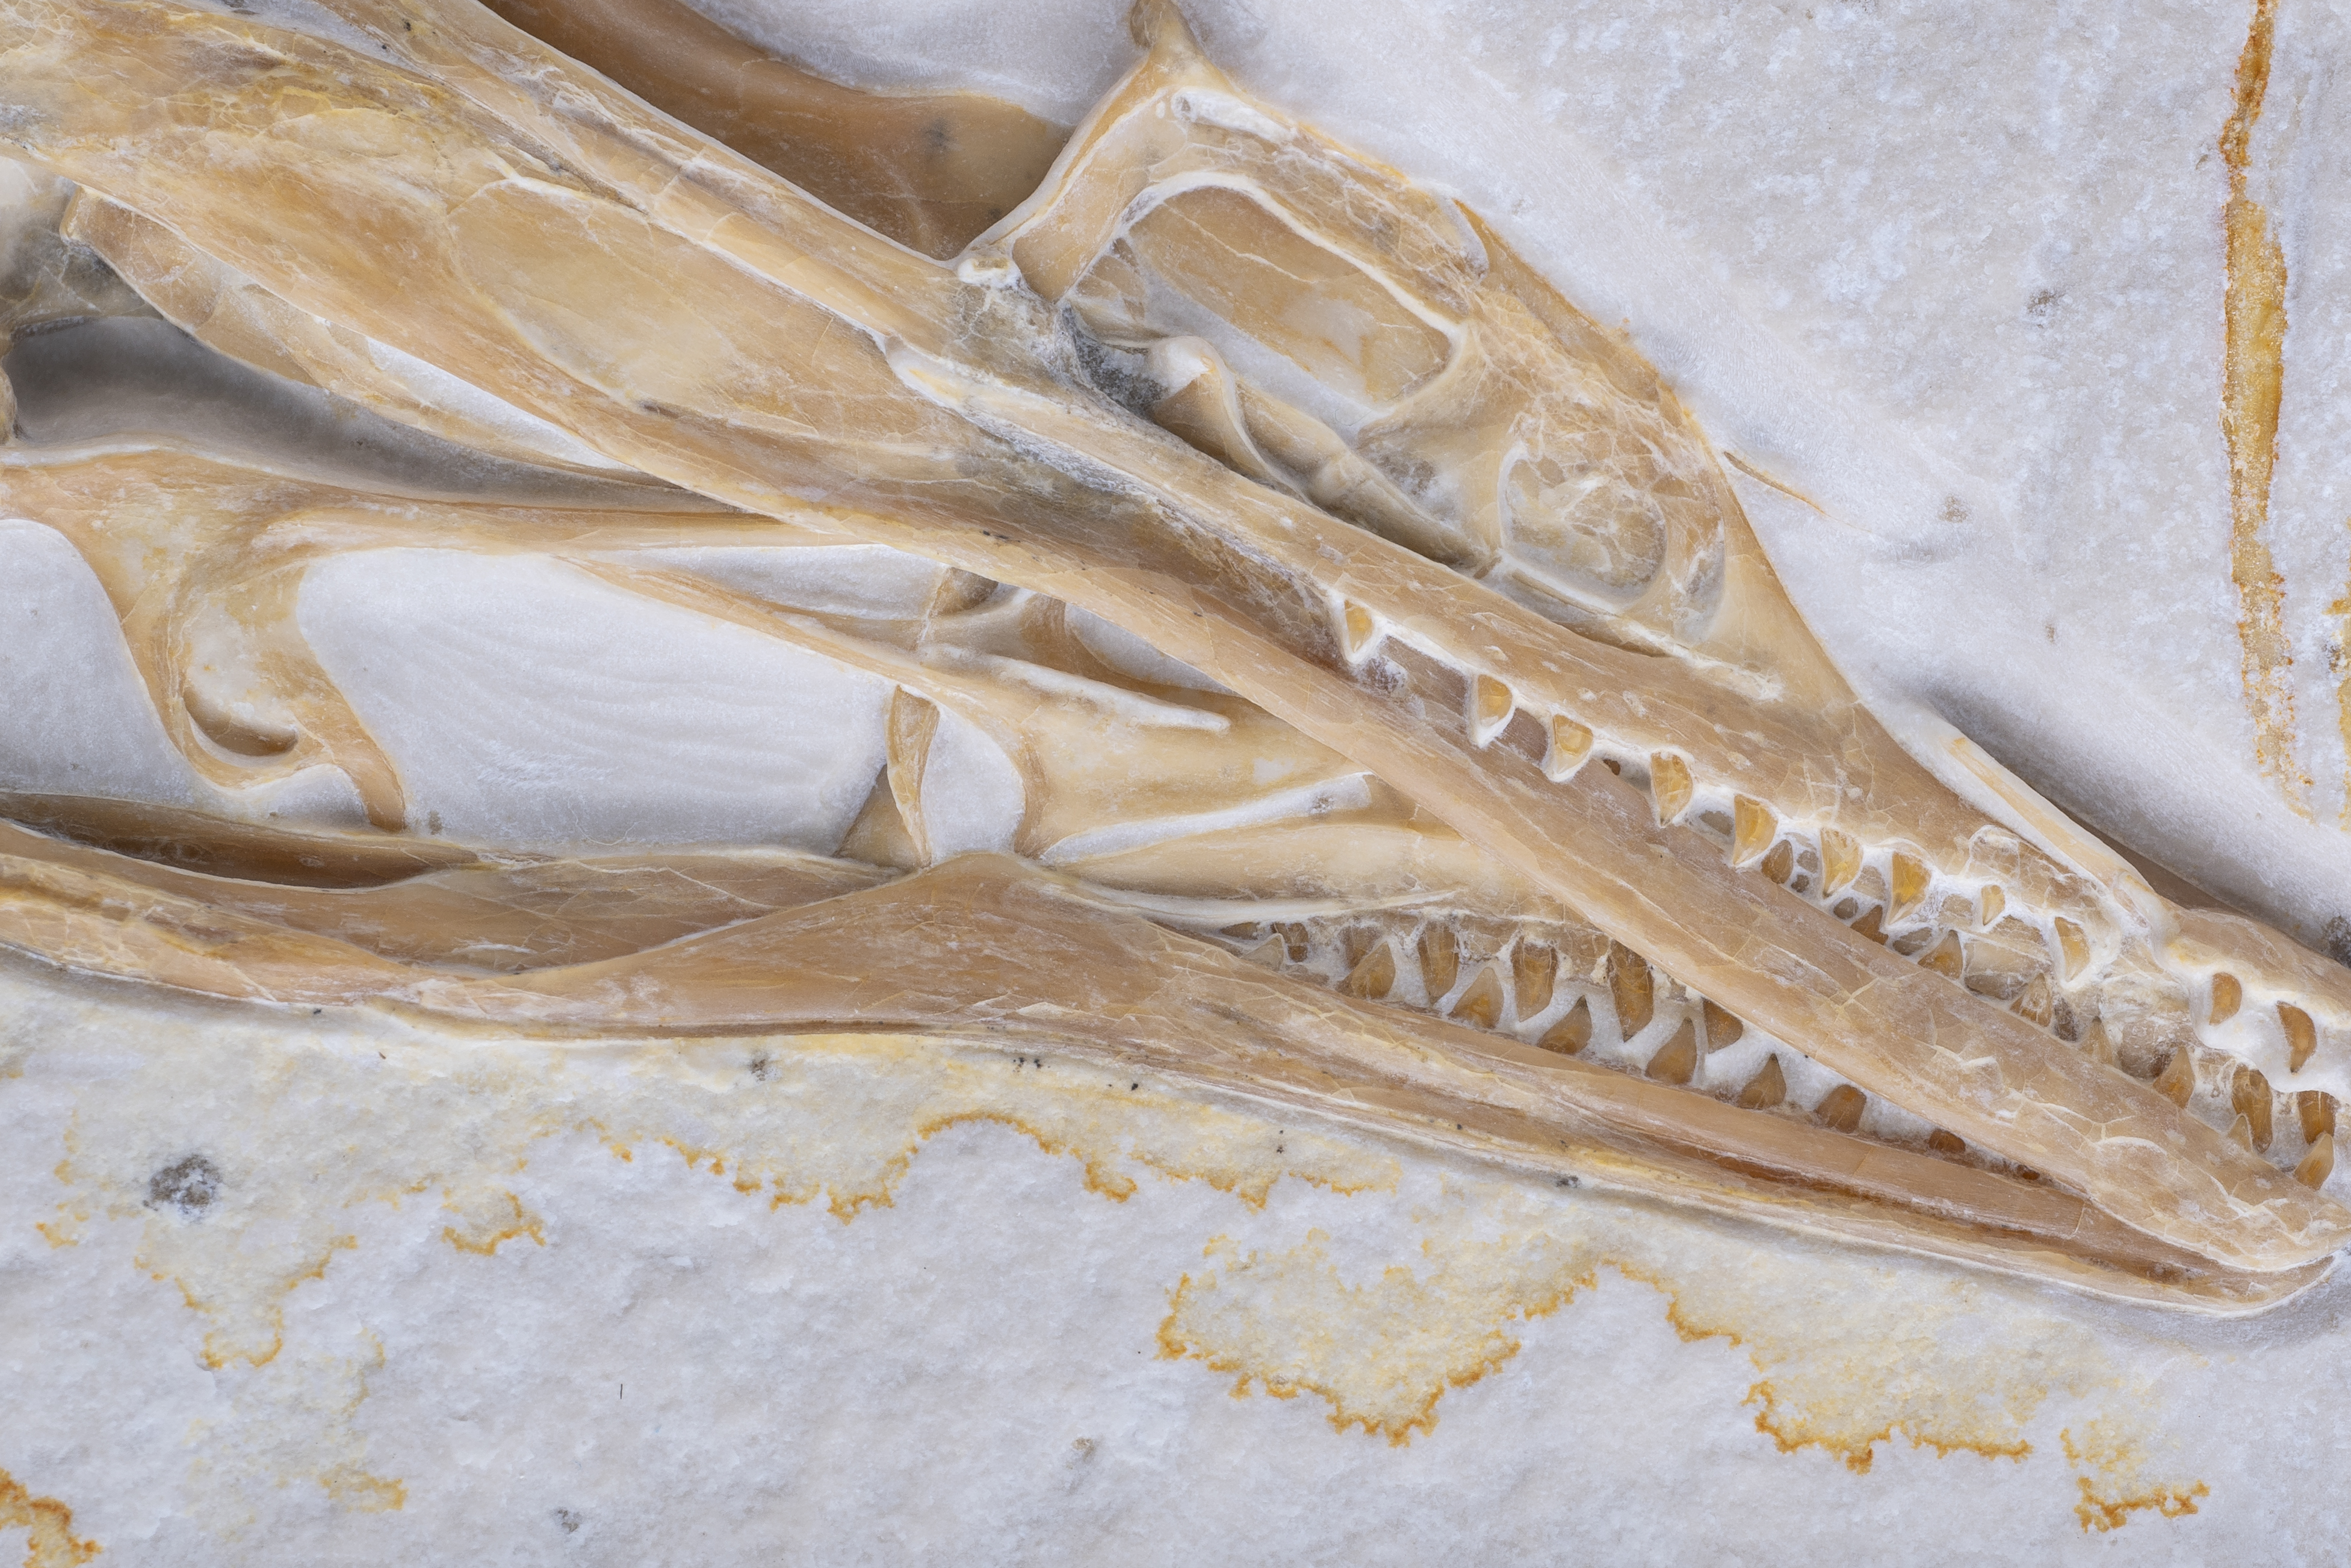 a fossil skull of Archaeopteryx embedded in a stone slab. It's many teeth are clearly visible.